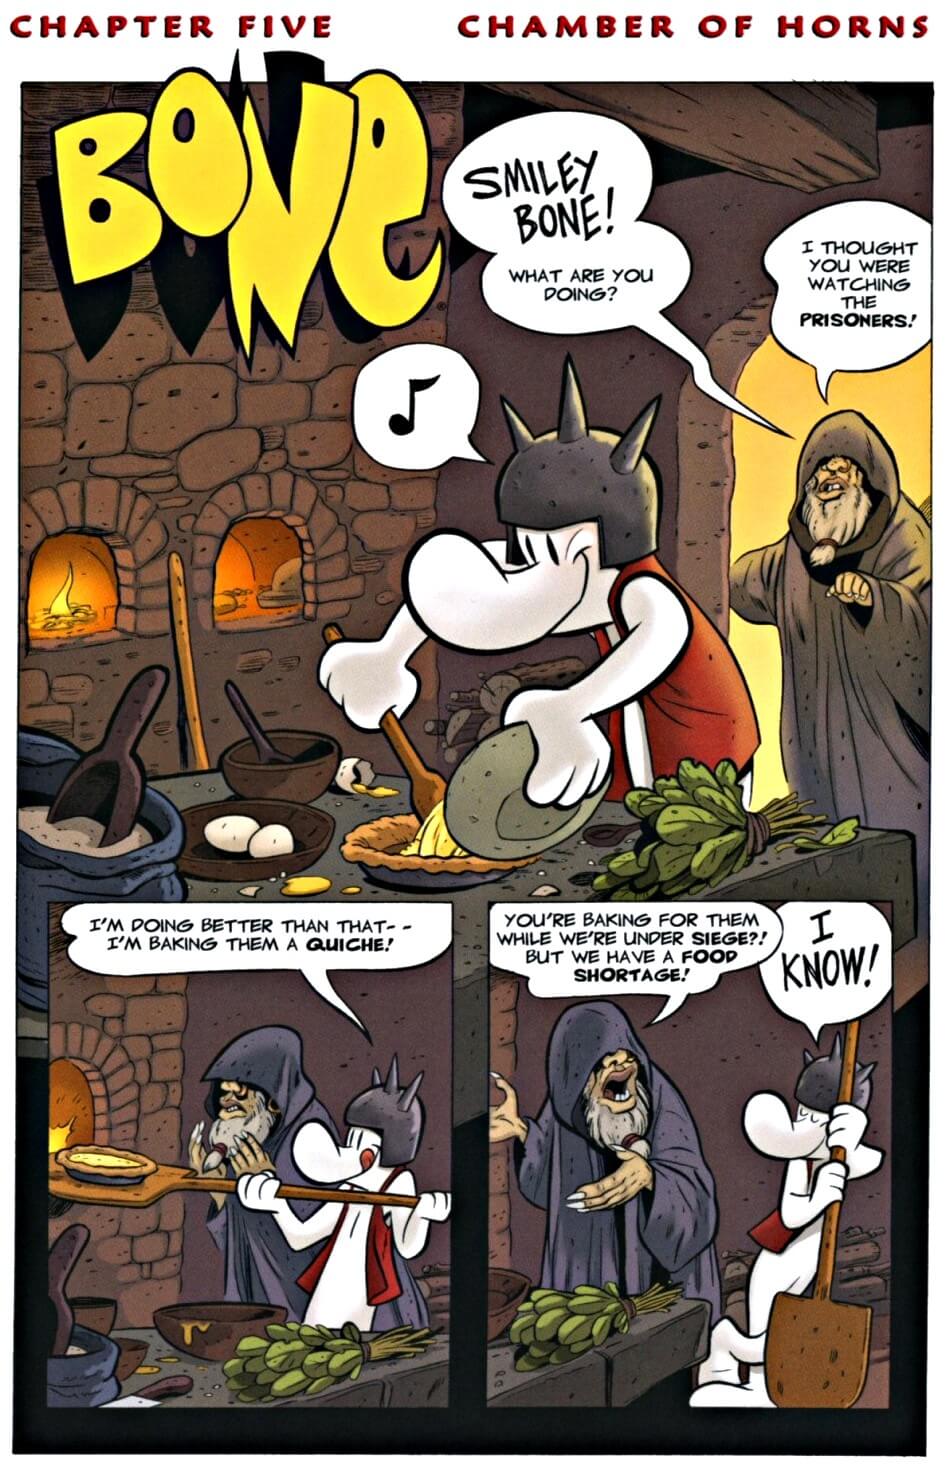 page 117 chapter 5 of bone 9 crown of horns graphic novel